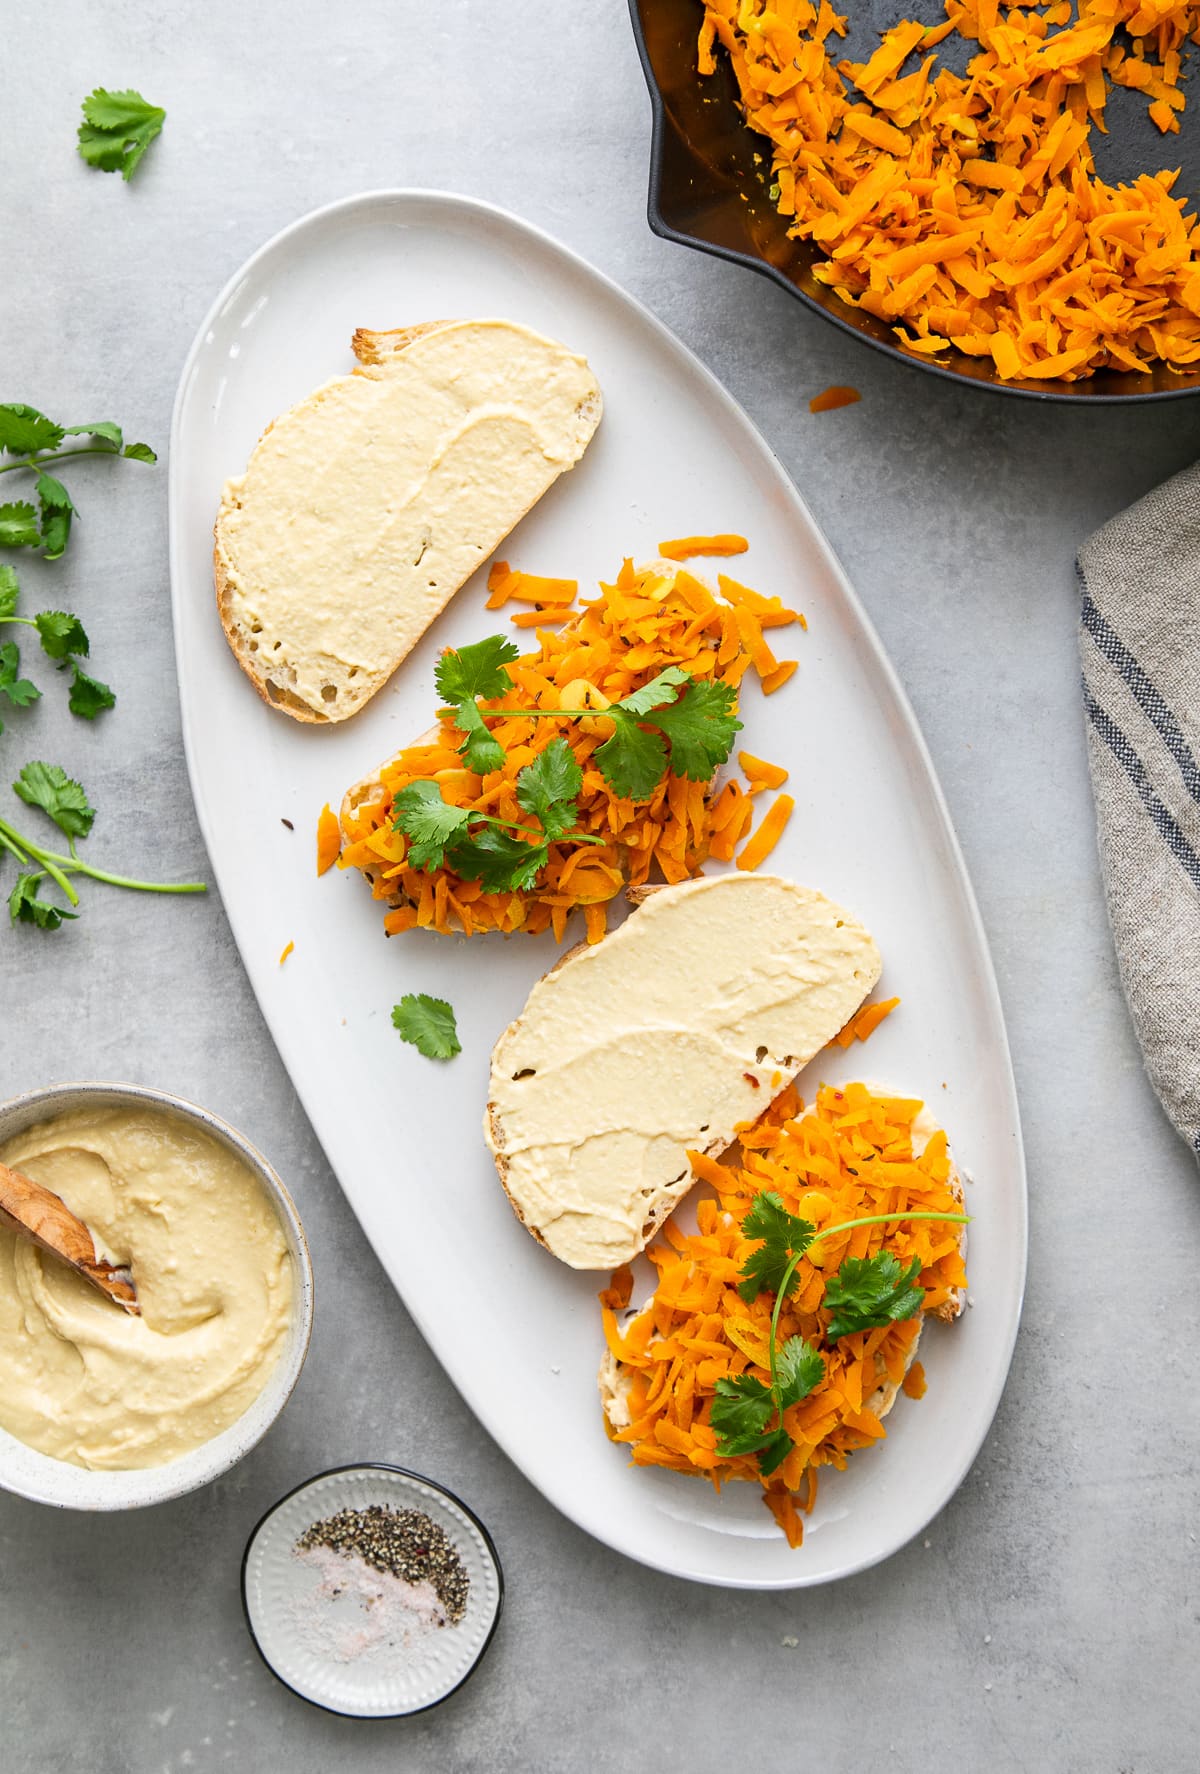 top down view showing the process of assembling carrot hummus sandwiches.